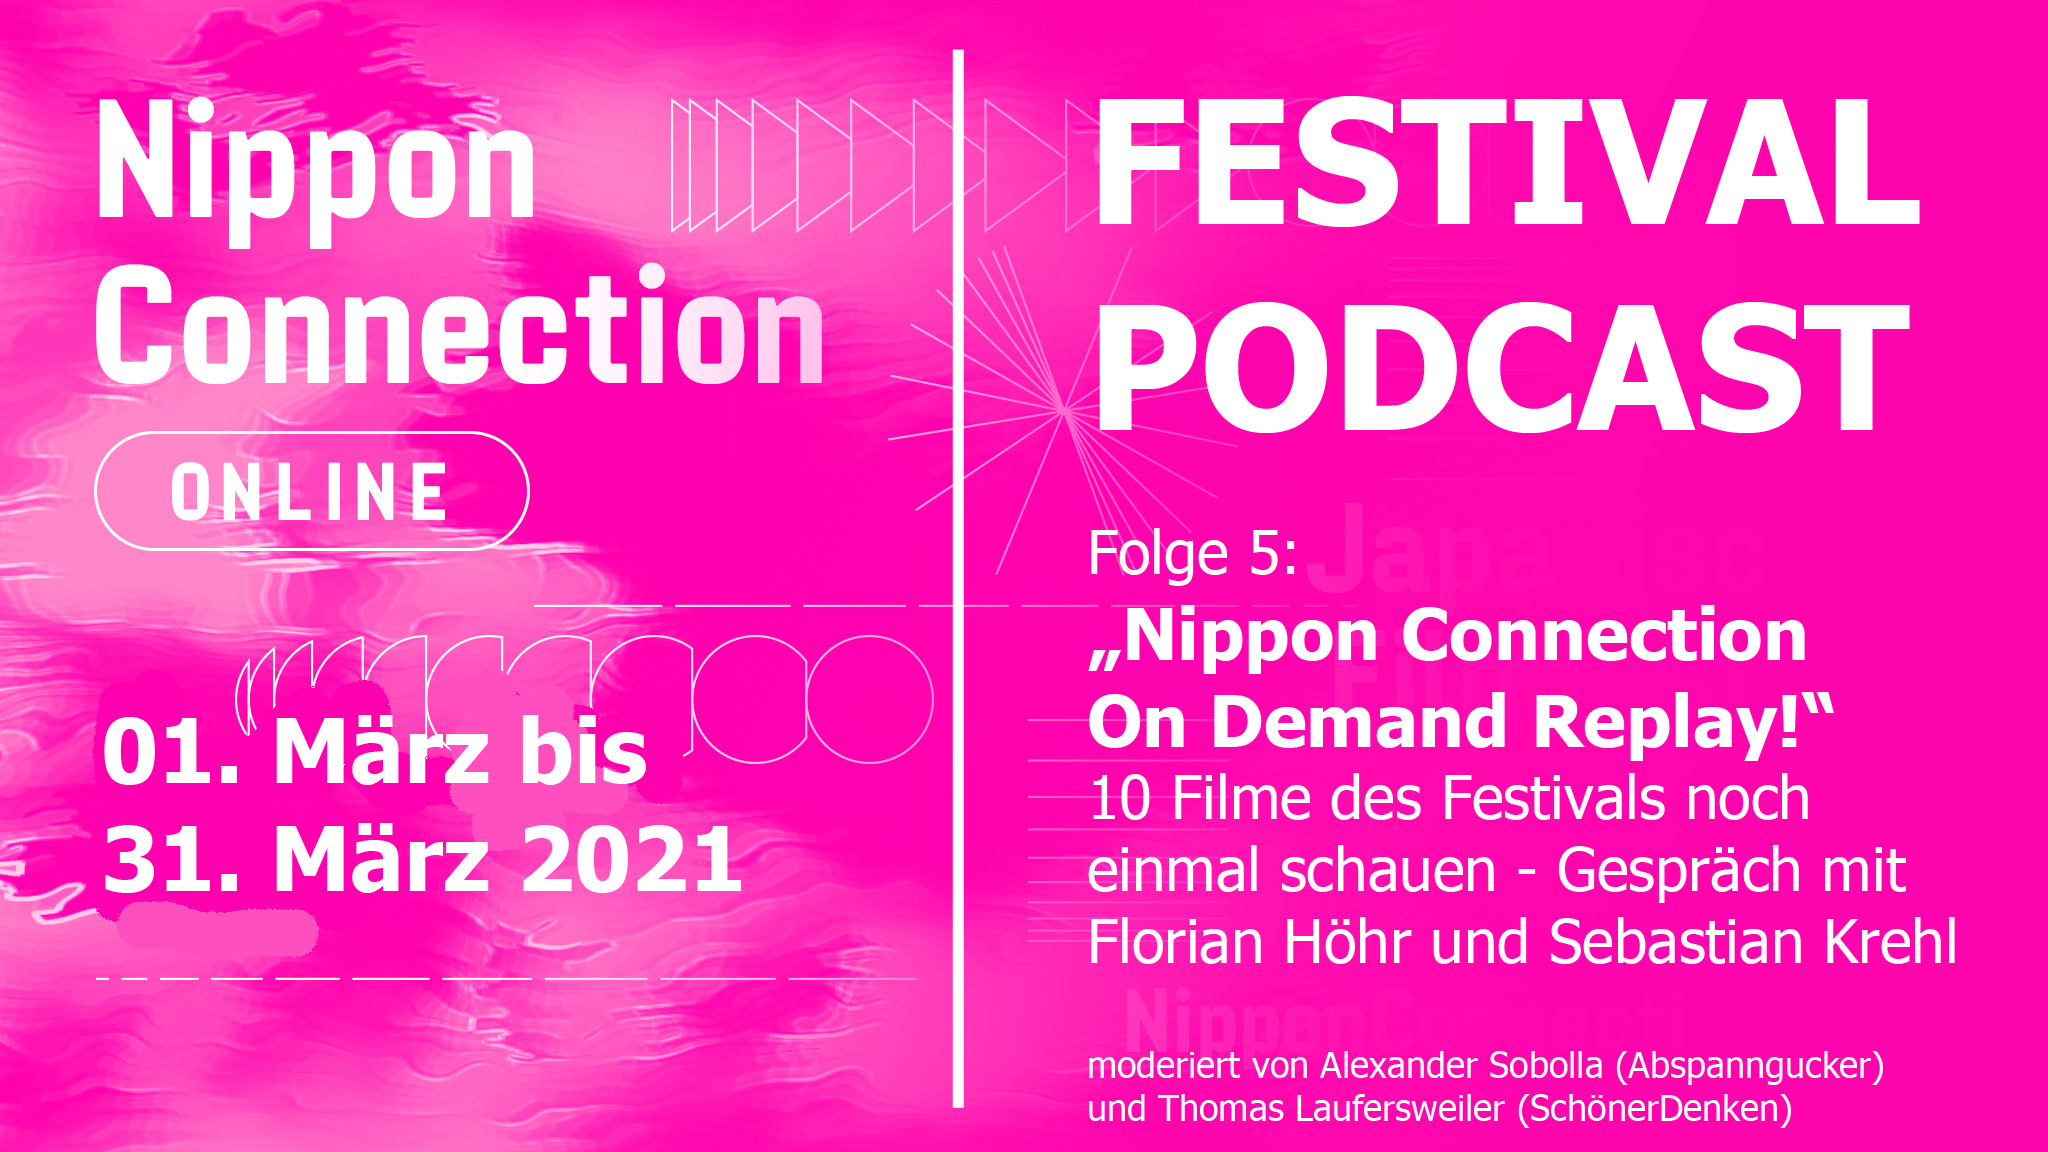 Nippon Connection Festival-Podcast 5 - Nippon Connection On Demand Replay